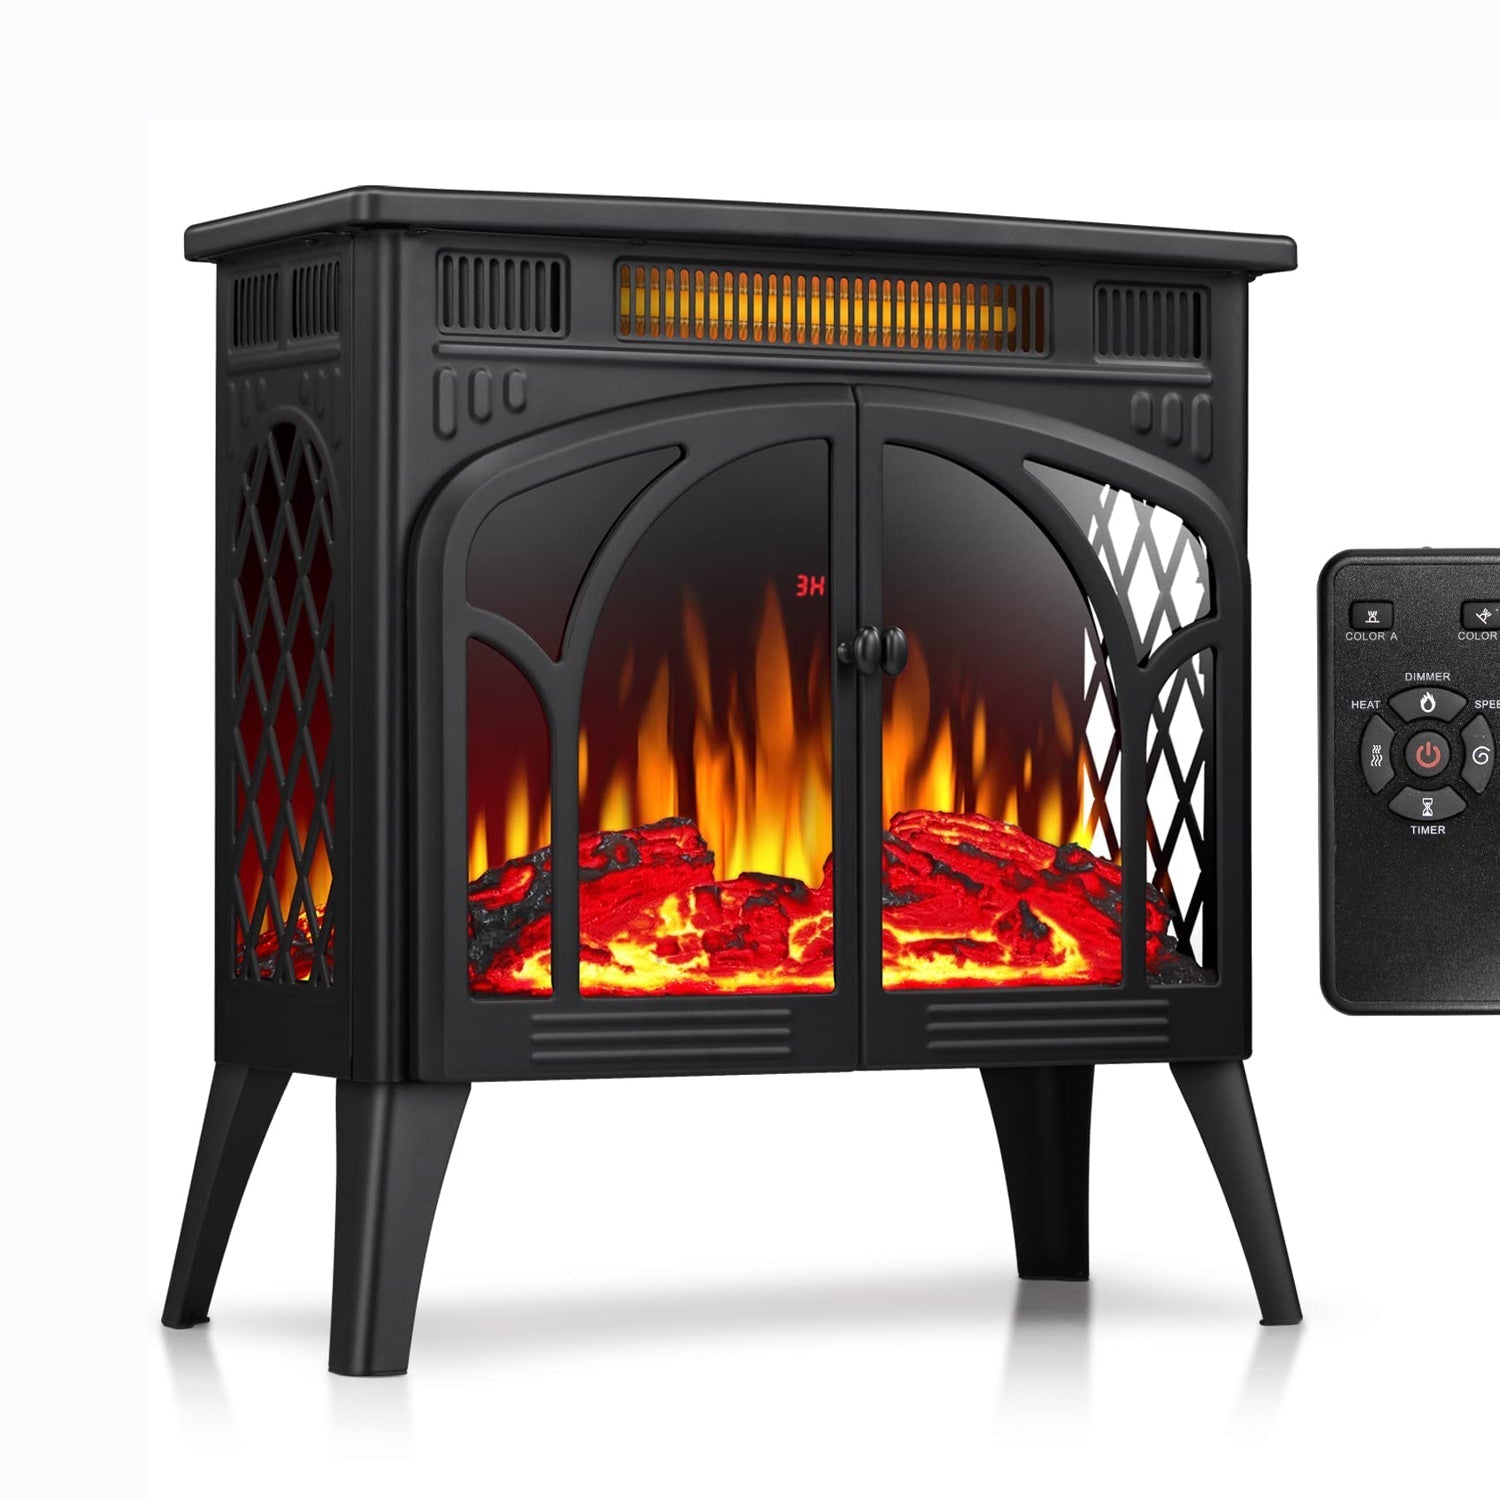 R.W.FLAME 24" Black Electric Fireplace Stove Heater